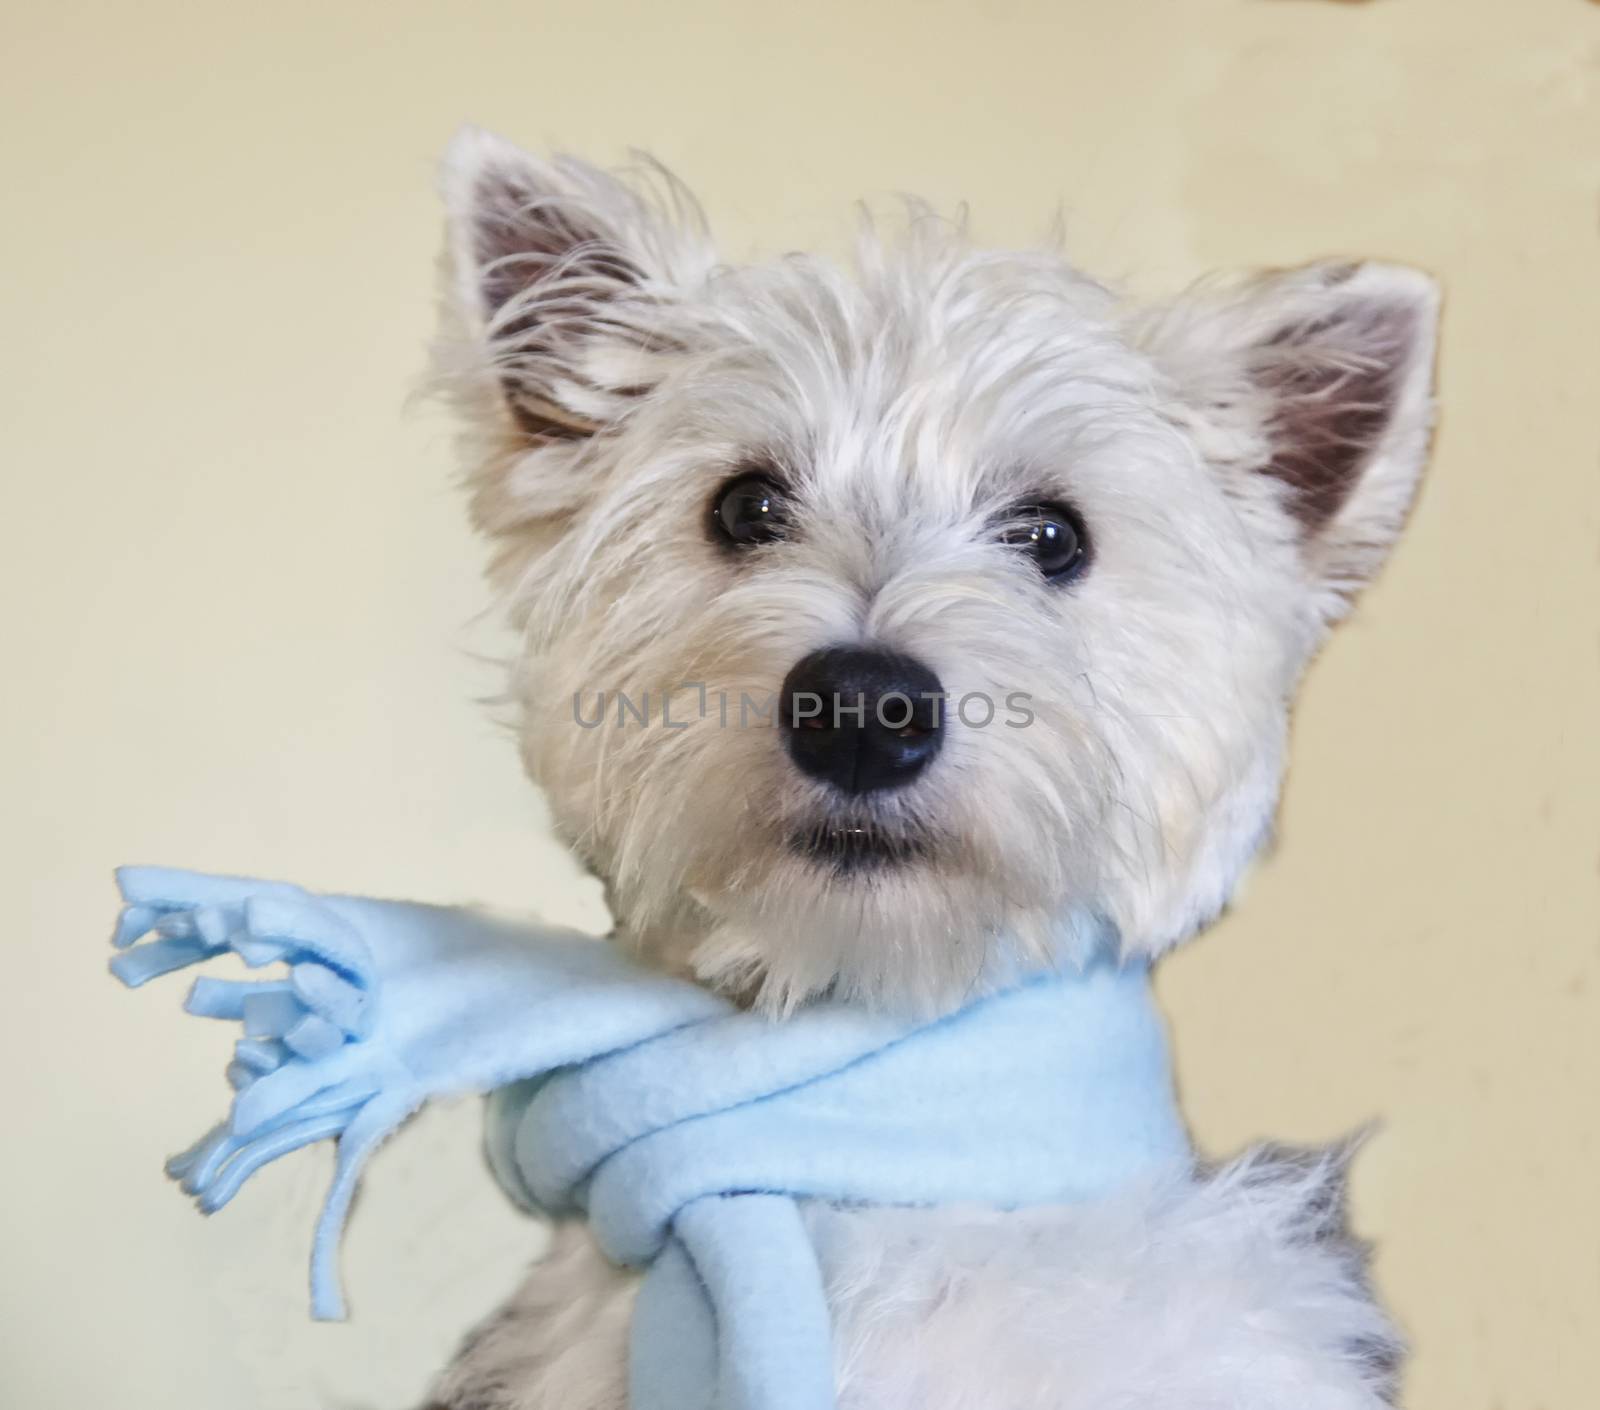 West Highlands Terrier with blue scarf, square image